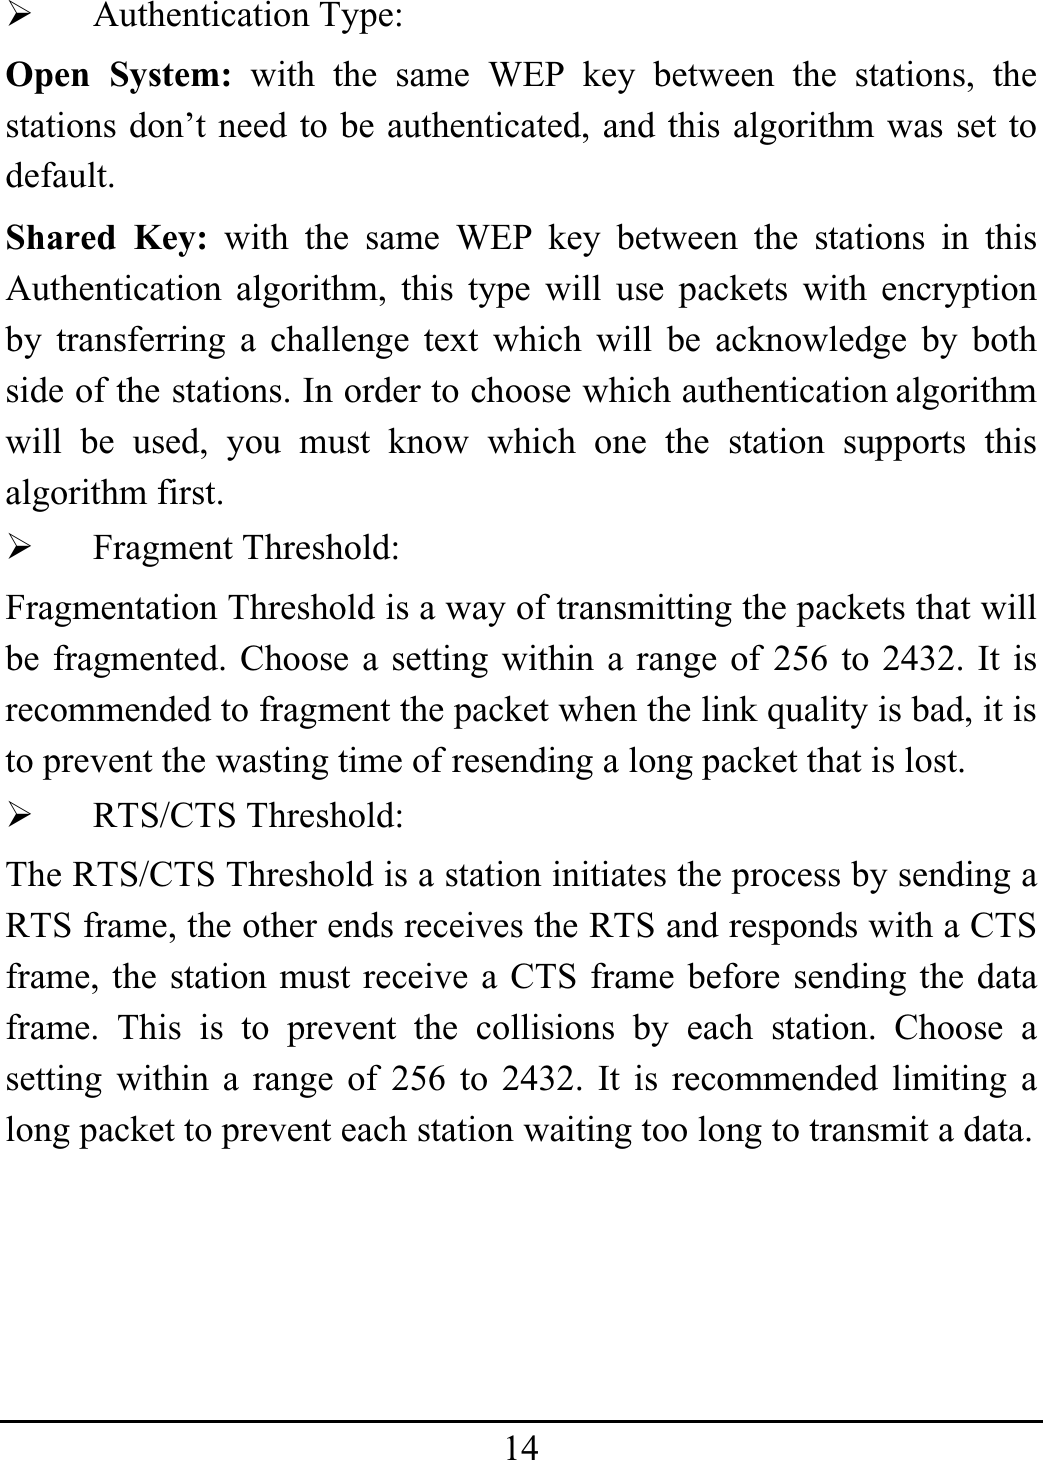 14¾ Authentication Type: Open System: with the same WEP key between the stations, the stations don’t need to be authenticated, and this algorithm was set to default. Shared Key: with the same WEP key between the stations in this Authentication algorithm, this type will use packets with encryption by transferring a challenge text which will be acknowledge by both side of the stations. In order to choose which authentication algorithm will be used, you must know which one the station supports this algorithm first. ¾ Fragment Threshold: Fragmentation Threshold is a way of transmitting the packets that will be fragmented. Choose a setting within a range of 256 to 2432. It is recommended to fragment the packet when the link quality is bad, it is to prevent the wasting time of resending a long packet that is lost. ¾ RTS/CTS Threshold: The RTS/CTS Threshold is a station initiates the process by sending a RTS frame, the other ends receives the RTS and responds with a CTS frame, the station must receive a CTS frame before sending the data frame. This is to prevent the collisions by each station. Choose a setting within a range of 256 to 2432. It is recommended limiting a long packet to prevent each station waiting too long to transmit a data. 